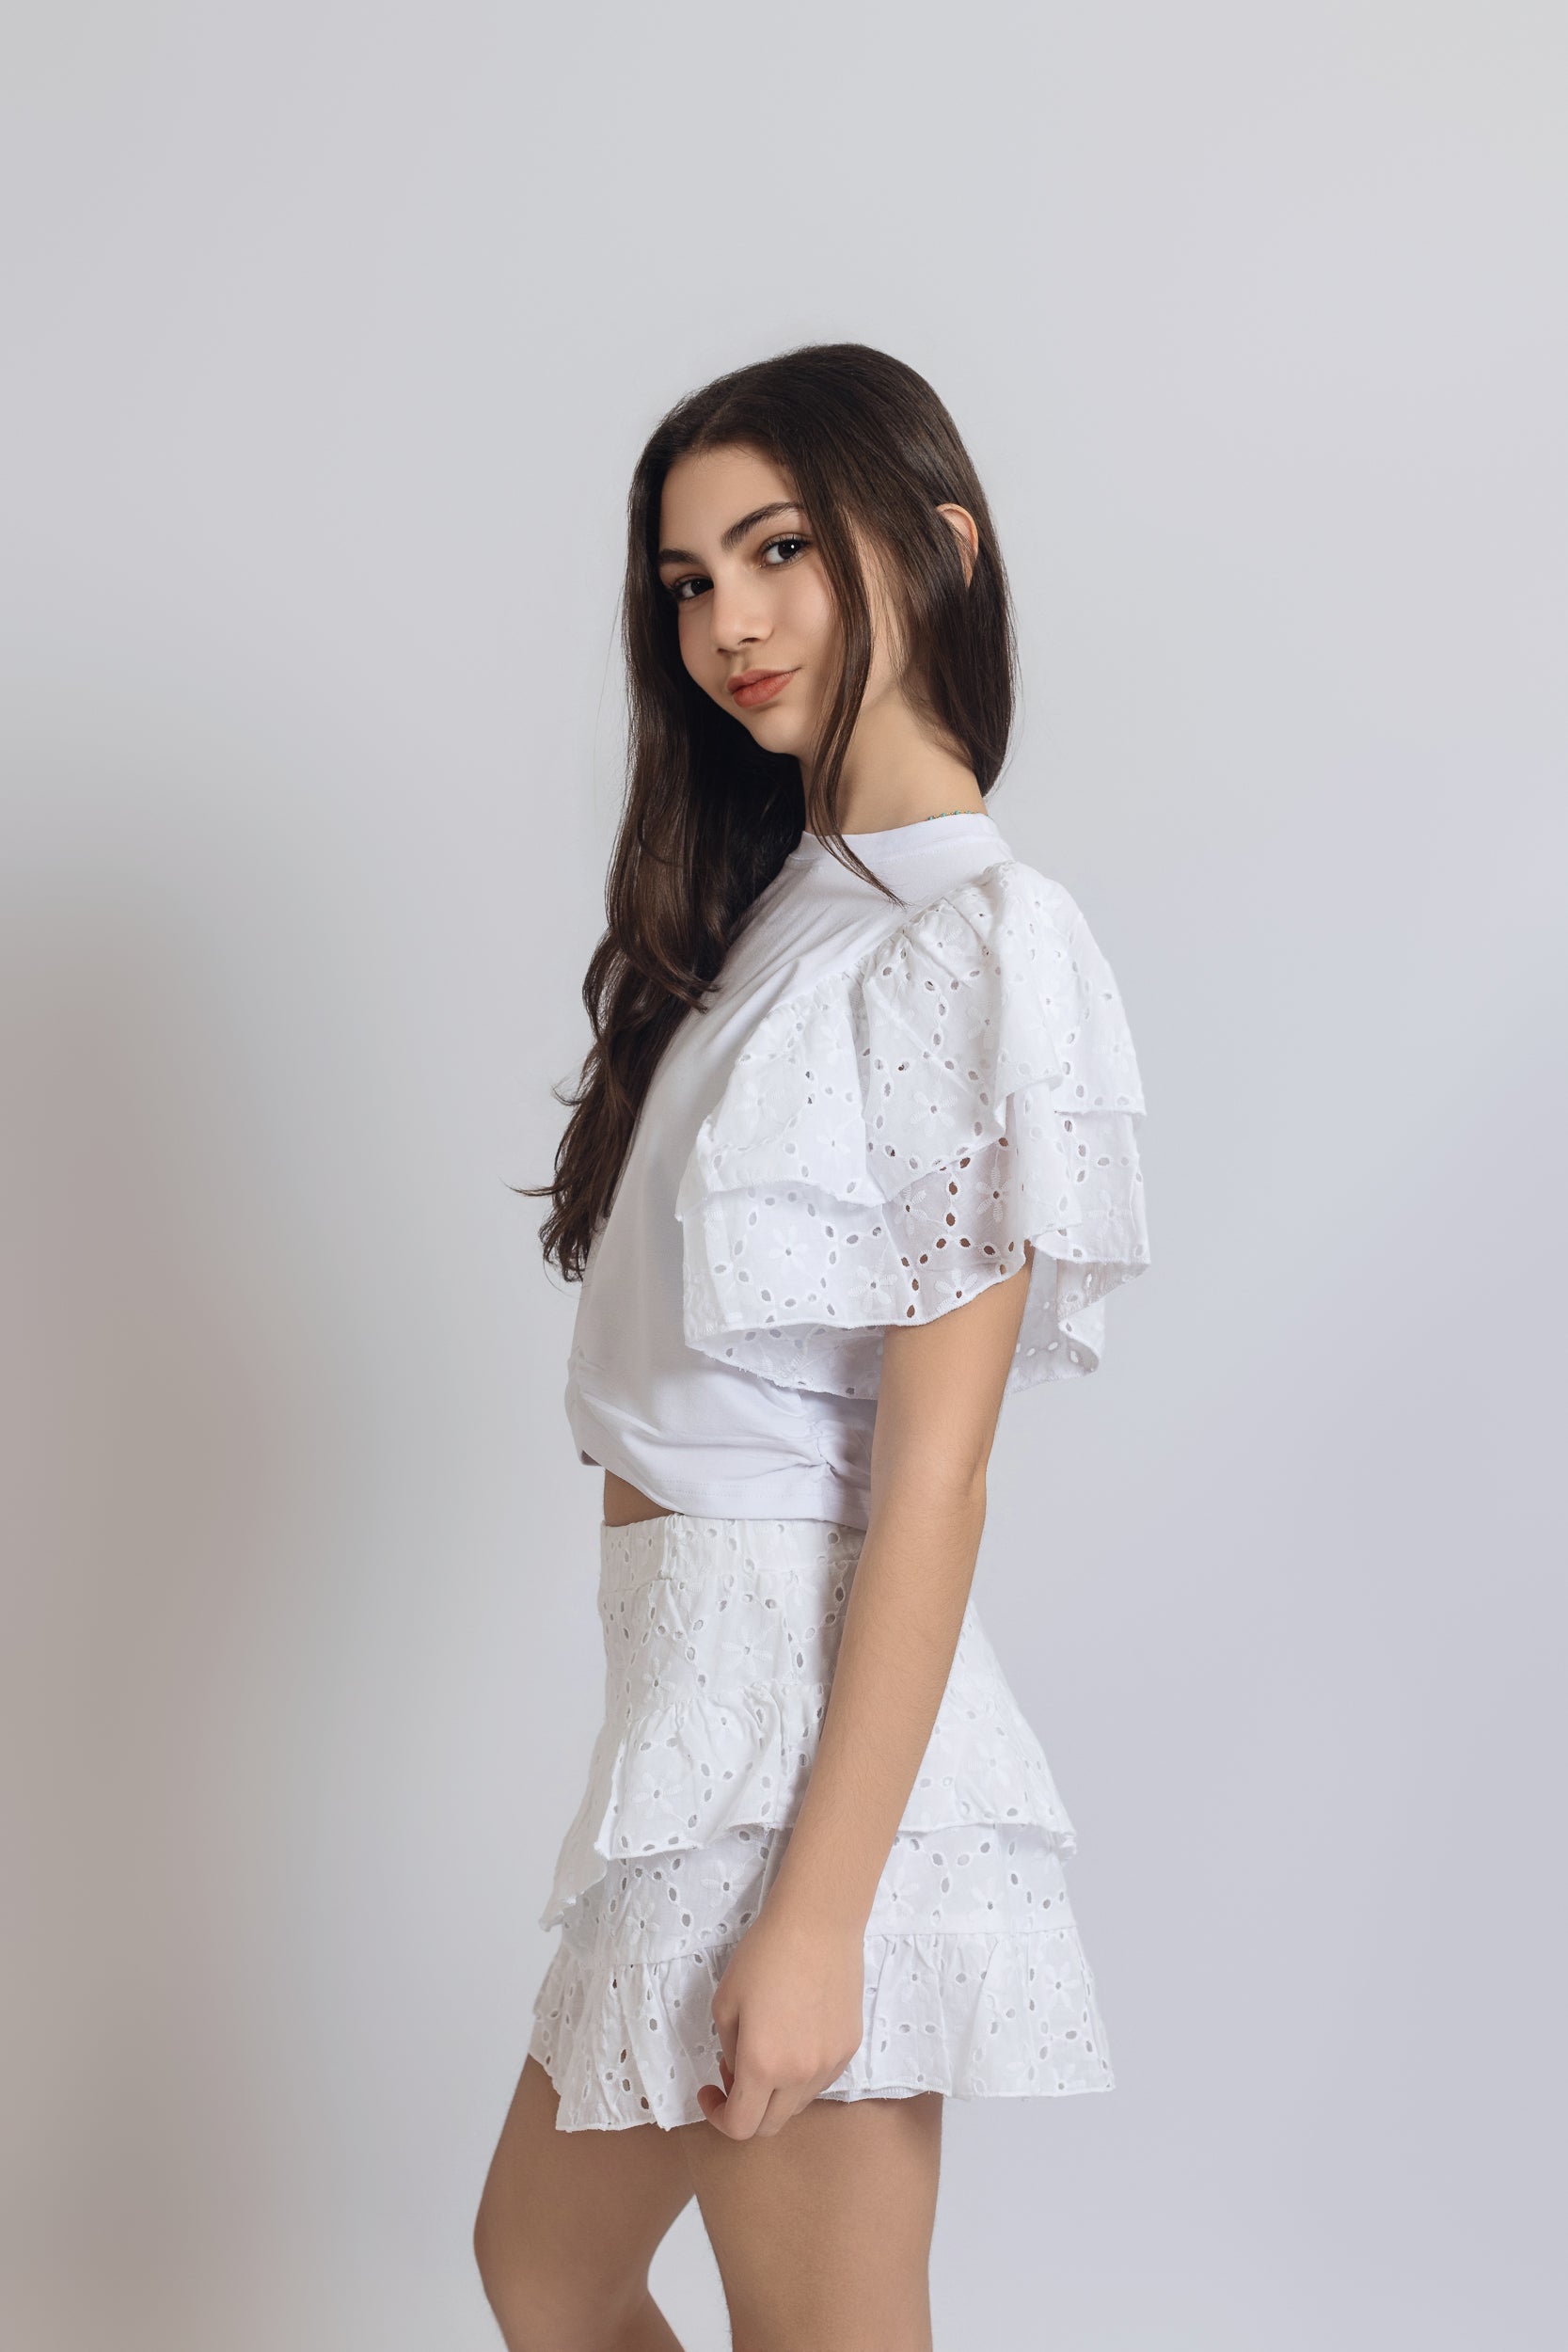 Cropped Top With Broderie Anglaise Sleeves For Girls - White